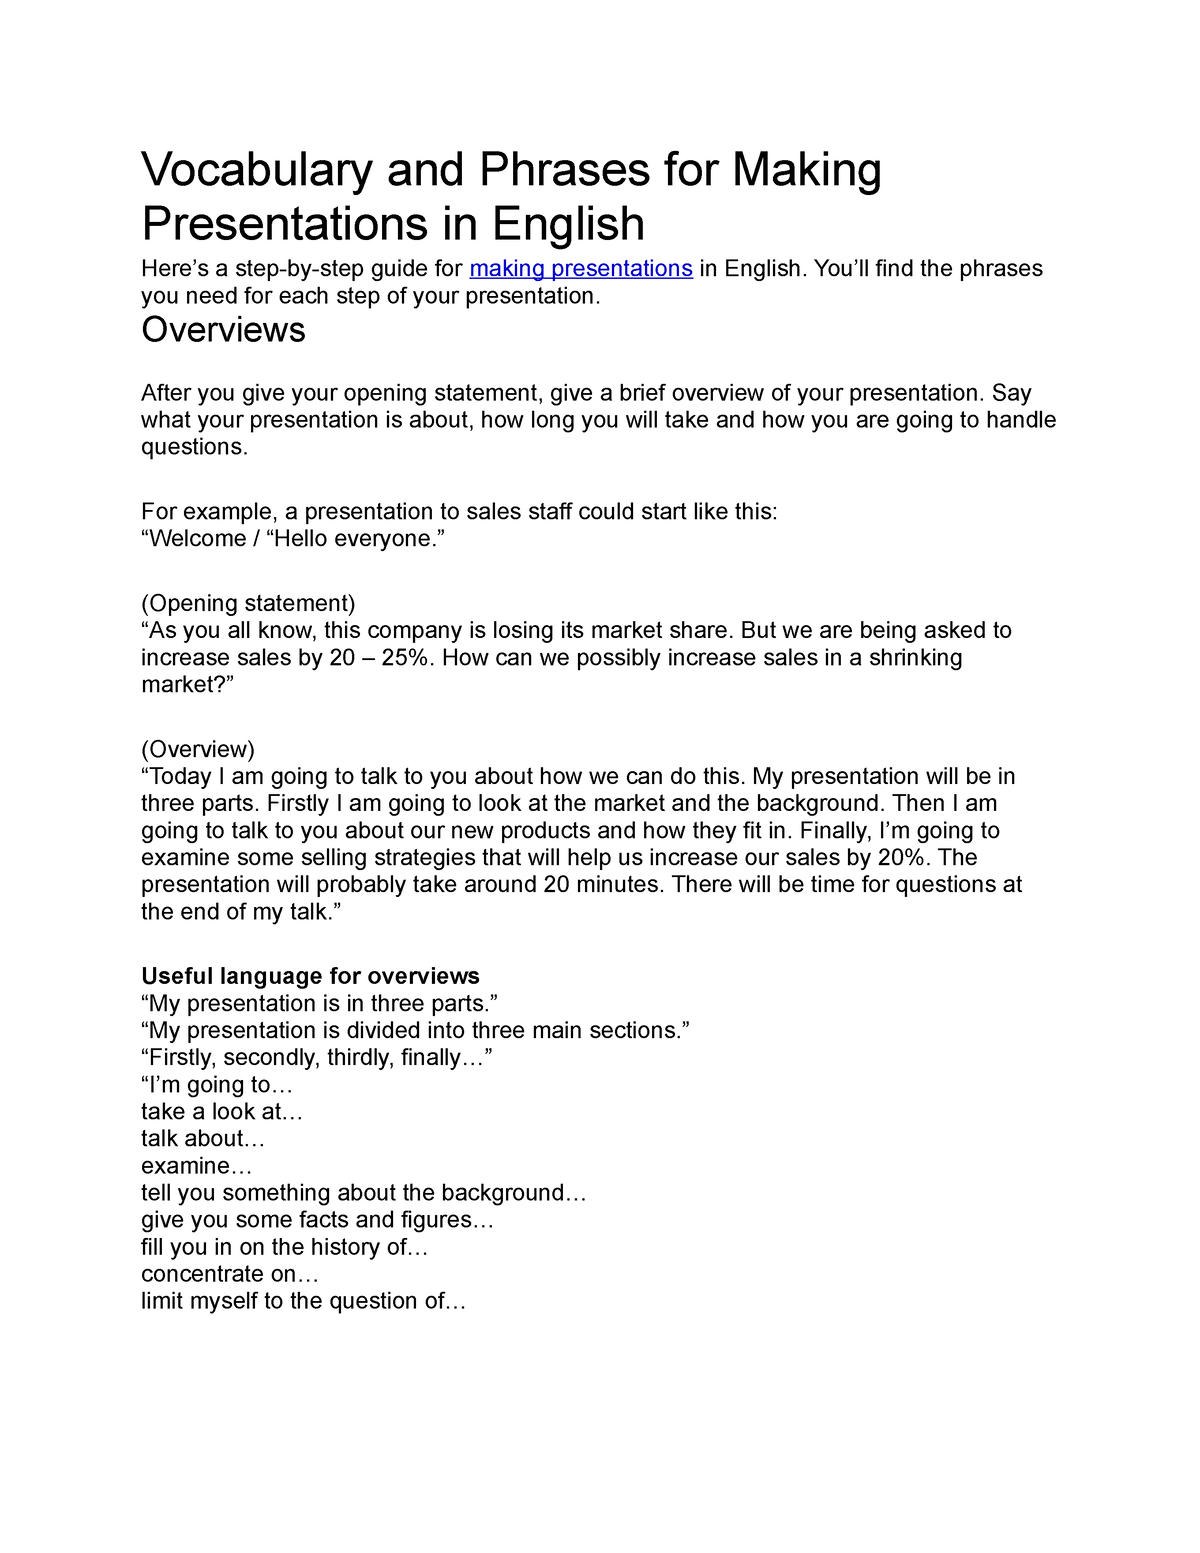 vocabulary for presentations in english